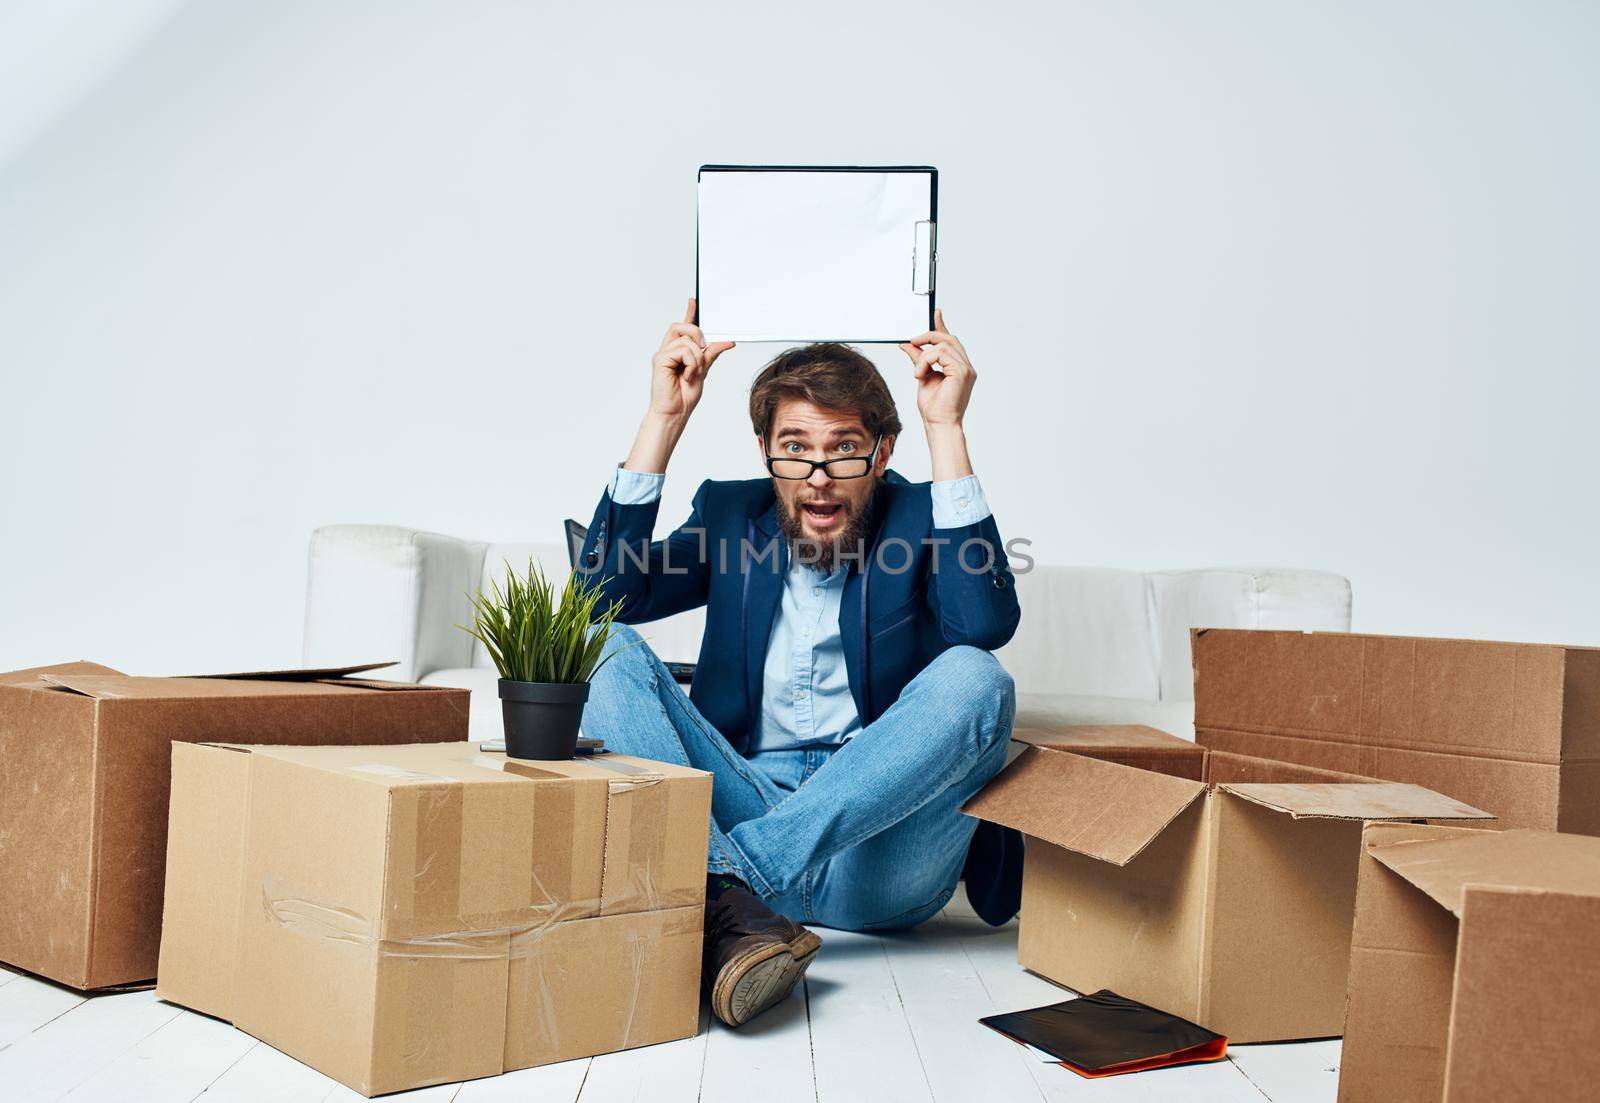 Emotional Man sits on the floor next to boxes unpacking a move Professional. High quality photo